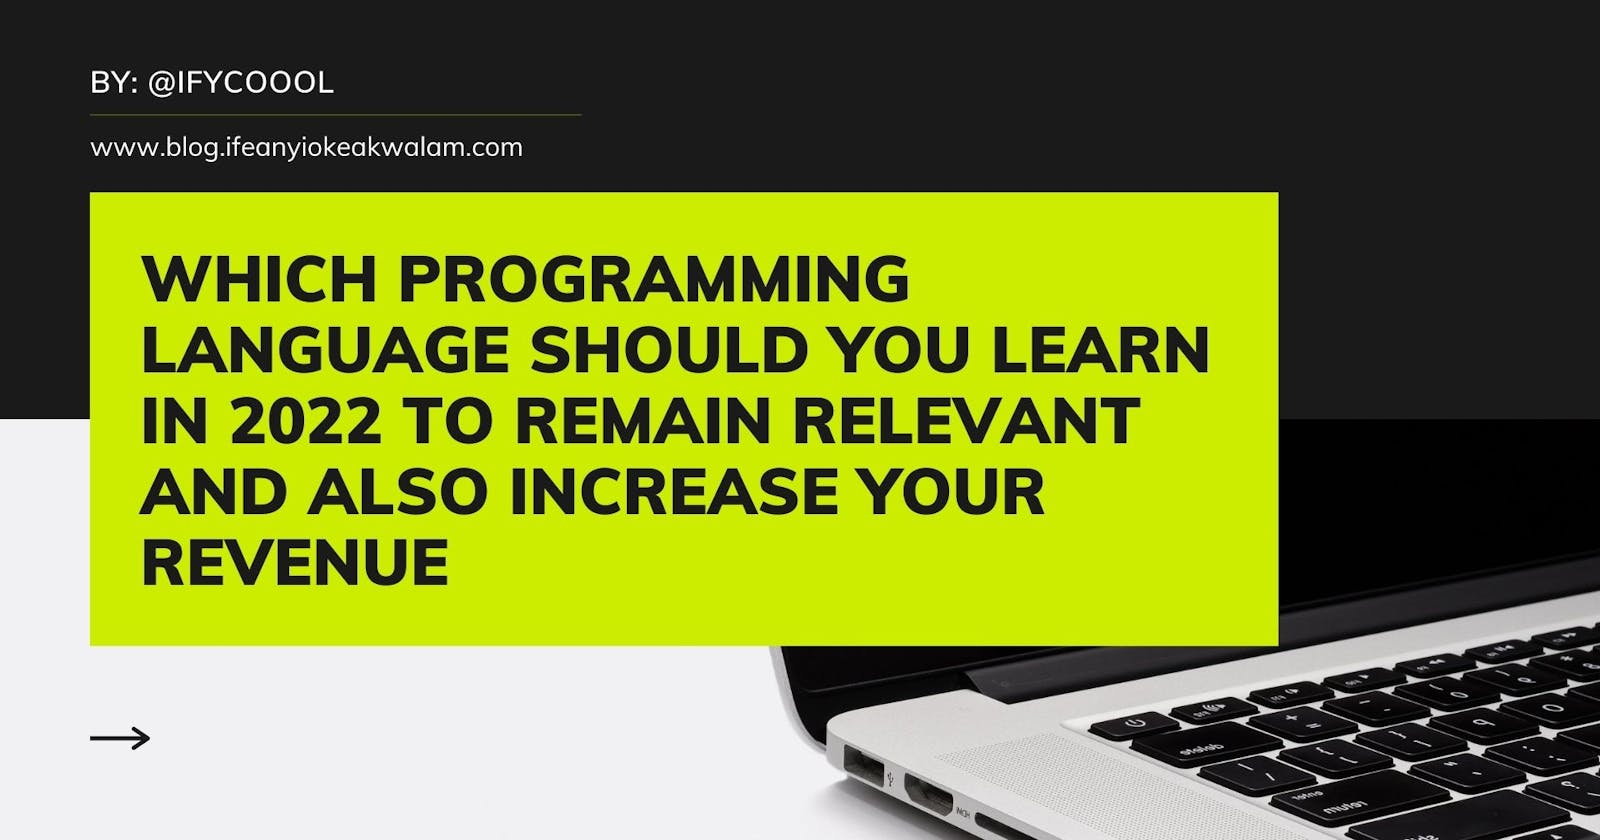 Which programming language should you learn in 2022 to remain relevant and also increase your revenue.